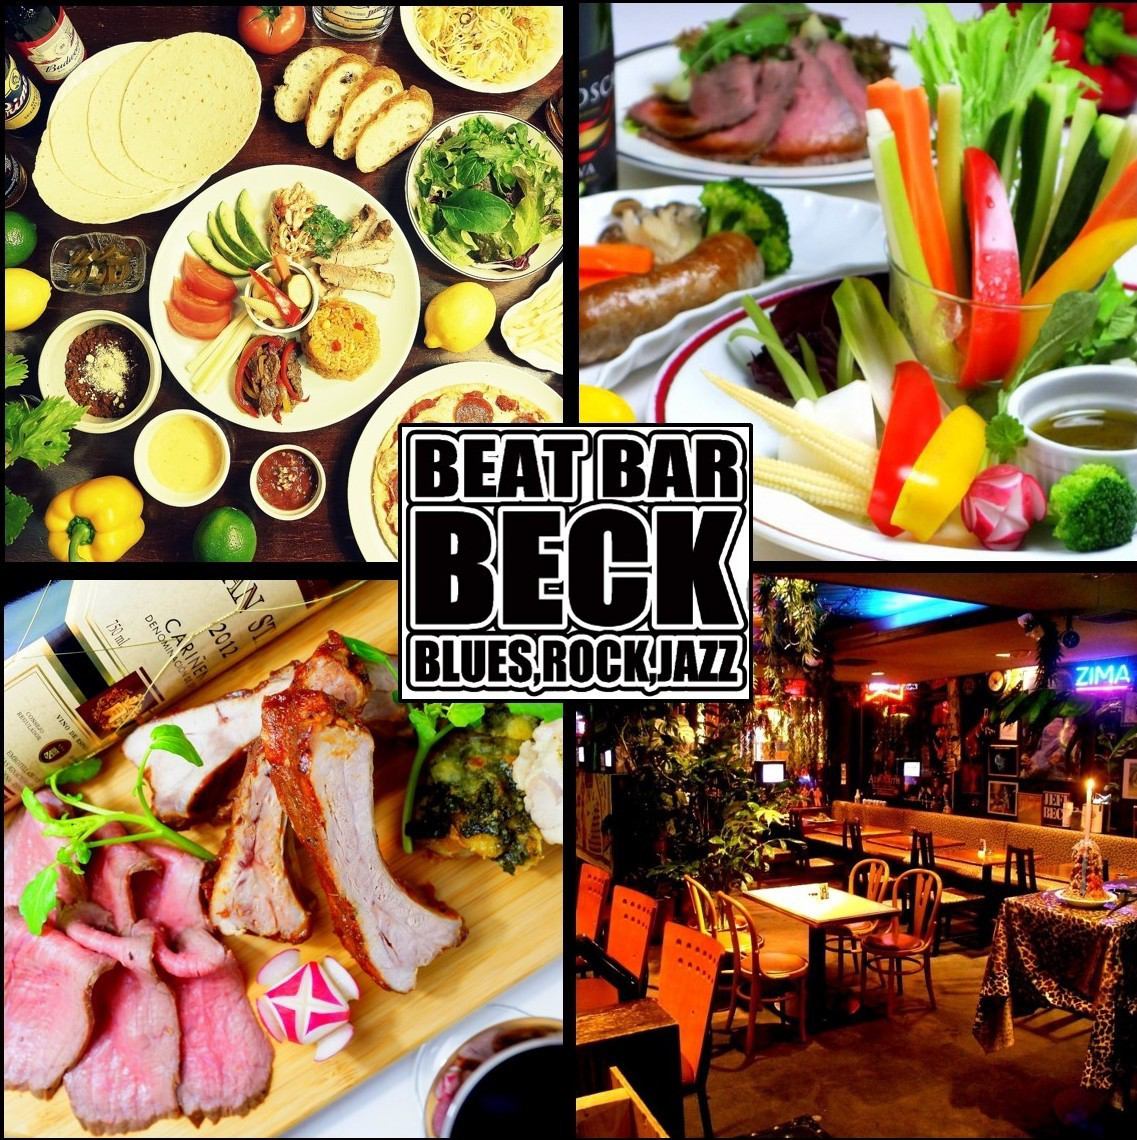 [Welcome to Beck !!] Travel back in time to America in the 1970s! Meals are welcome!